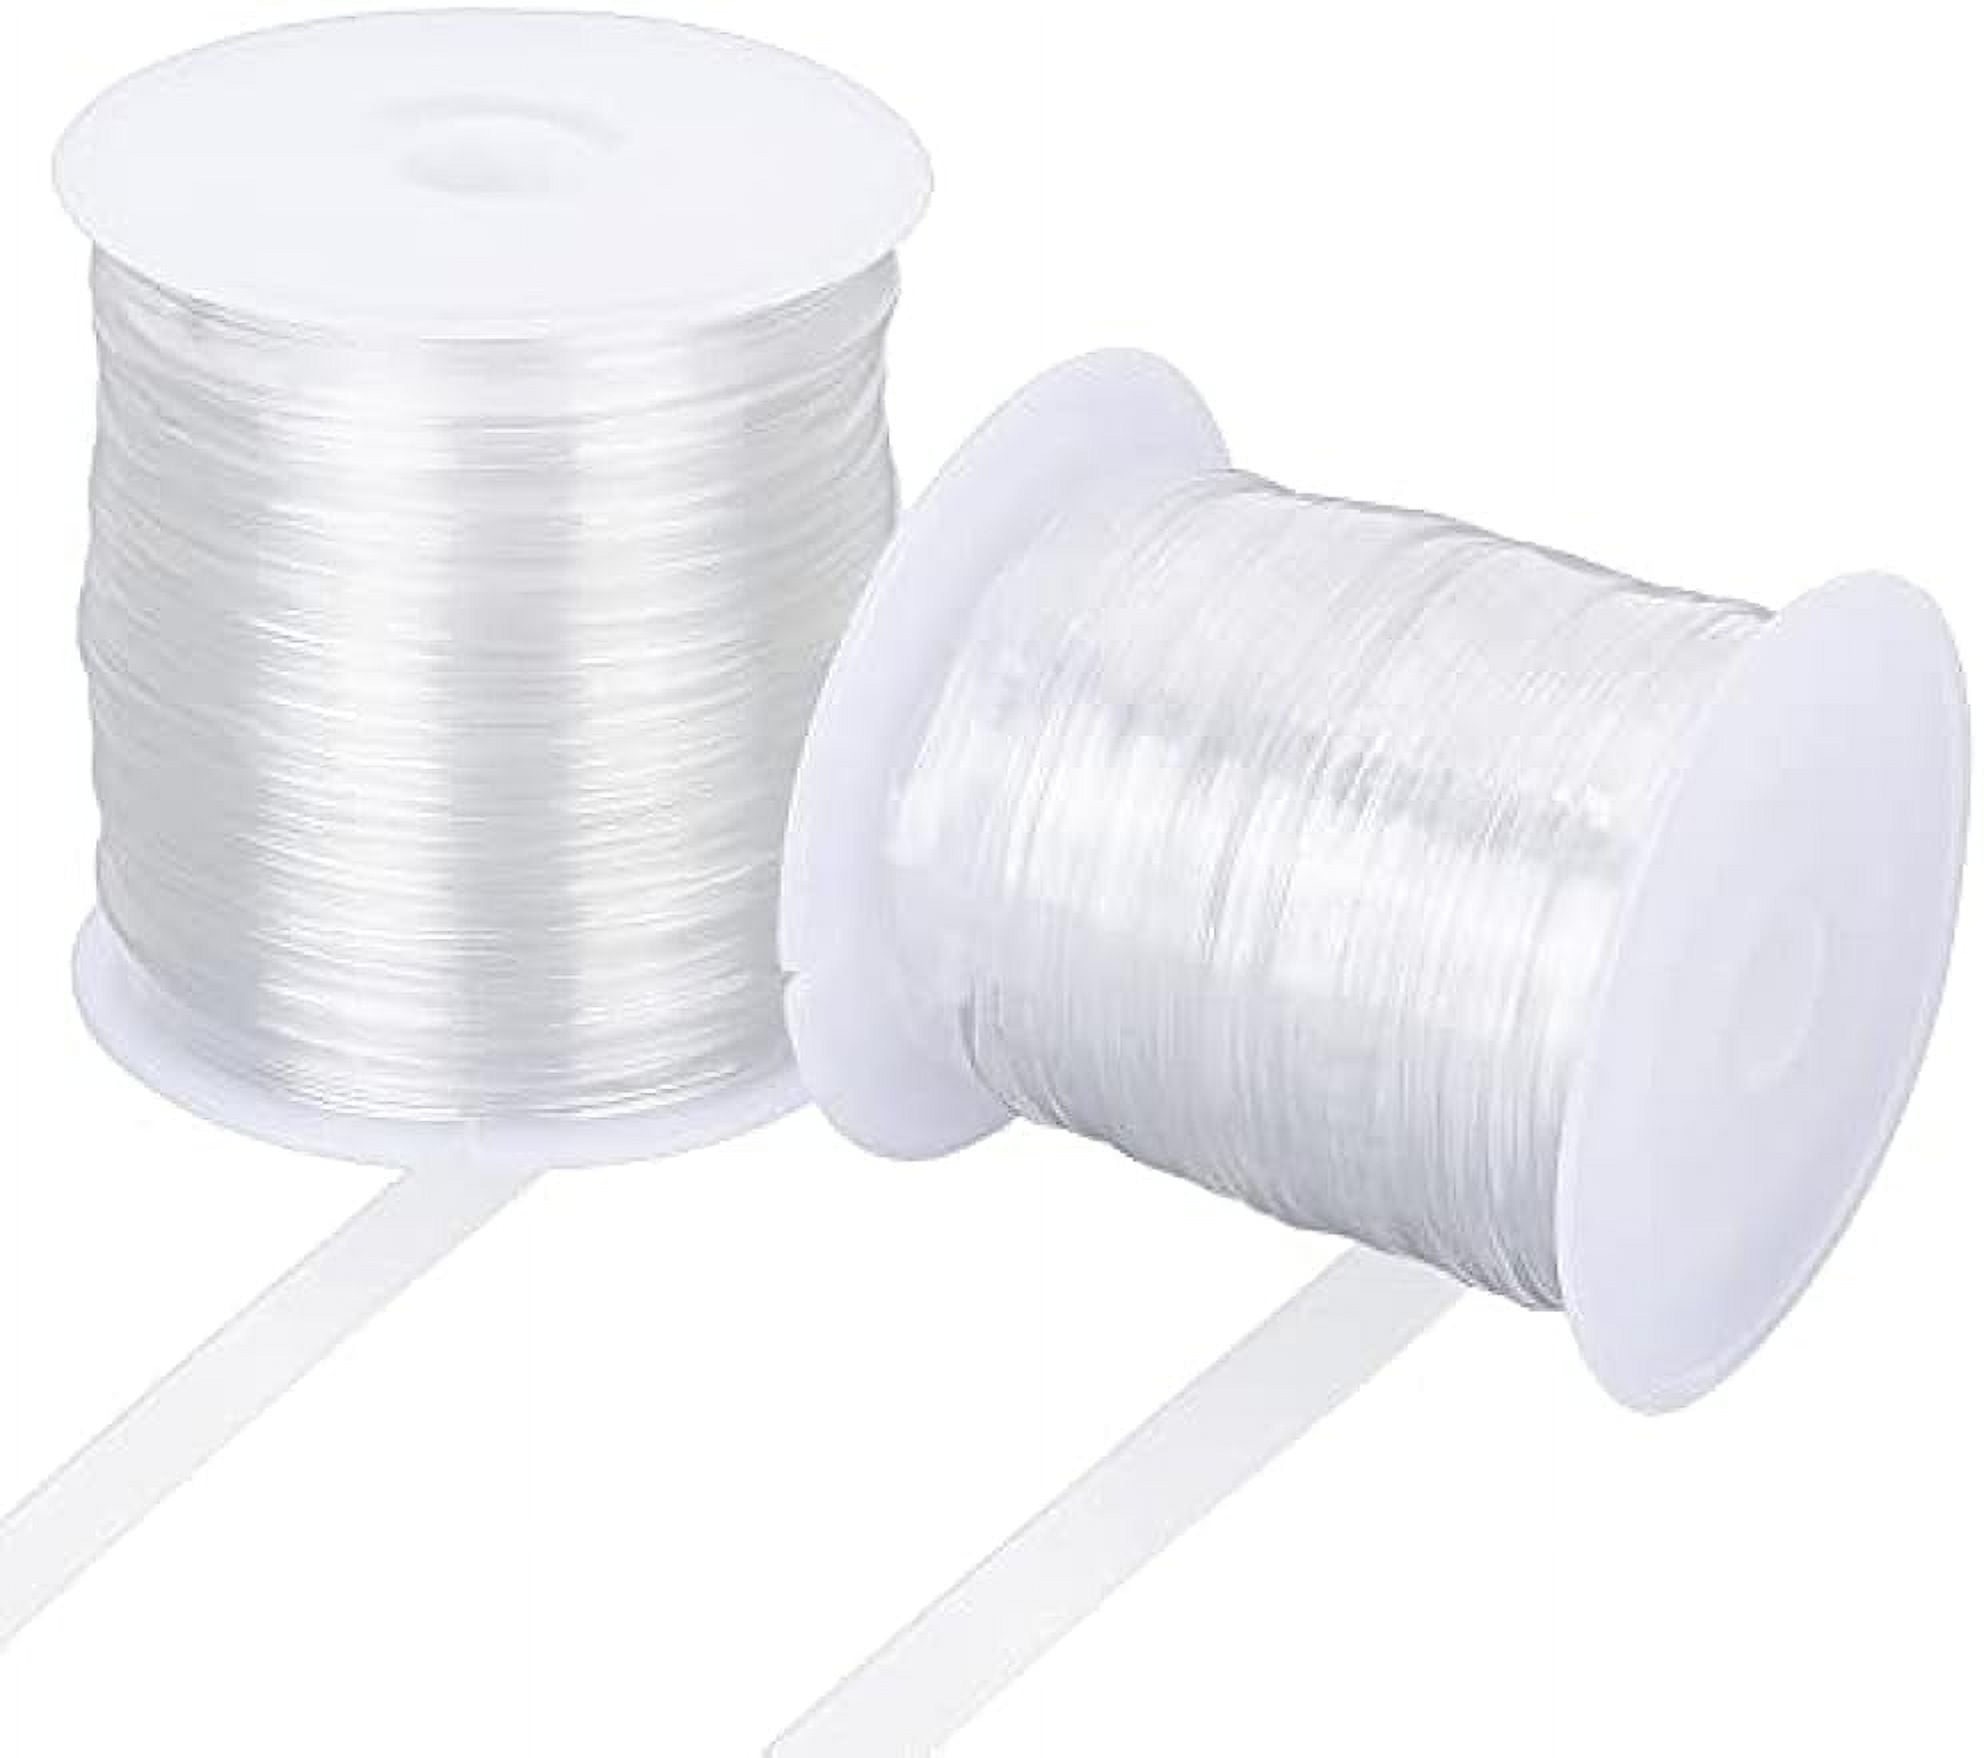 Clear Elastic Strap 2 Sizes 30M Total Plastic Stretchable Adjustable Cord  for DIY Shoulder Bra Clothes Sewing Project 6mm/10mm 